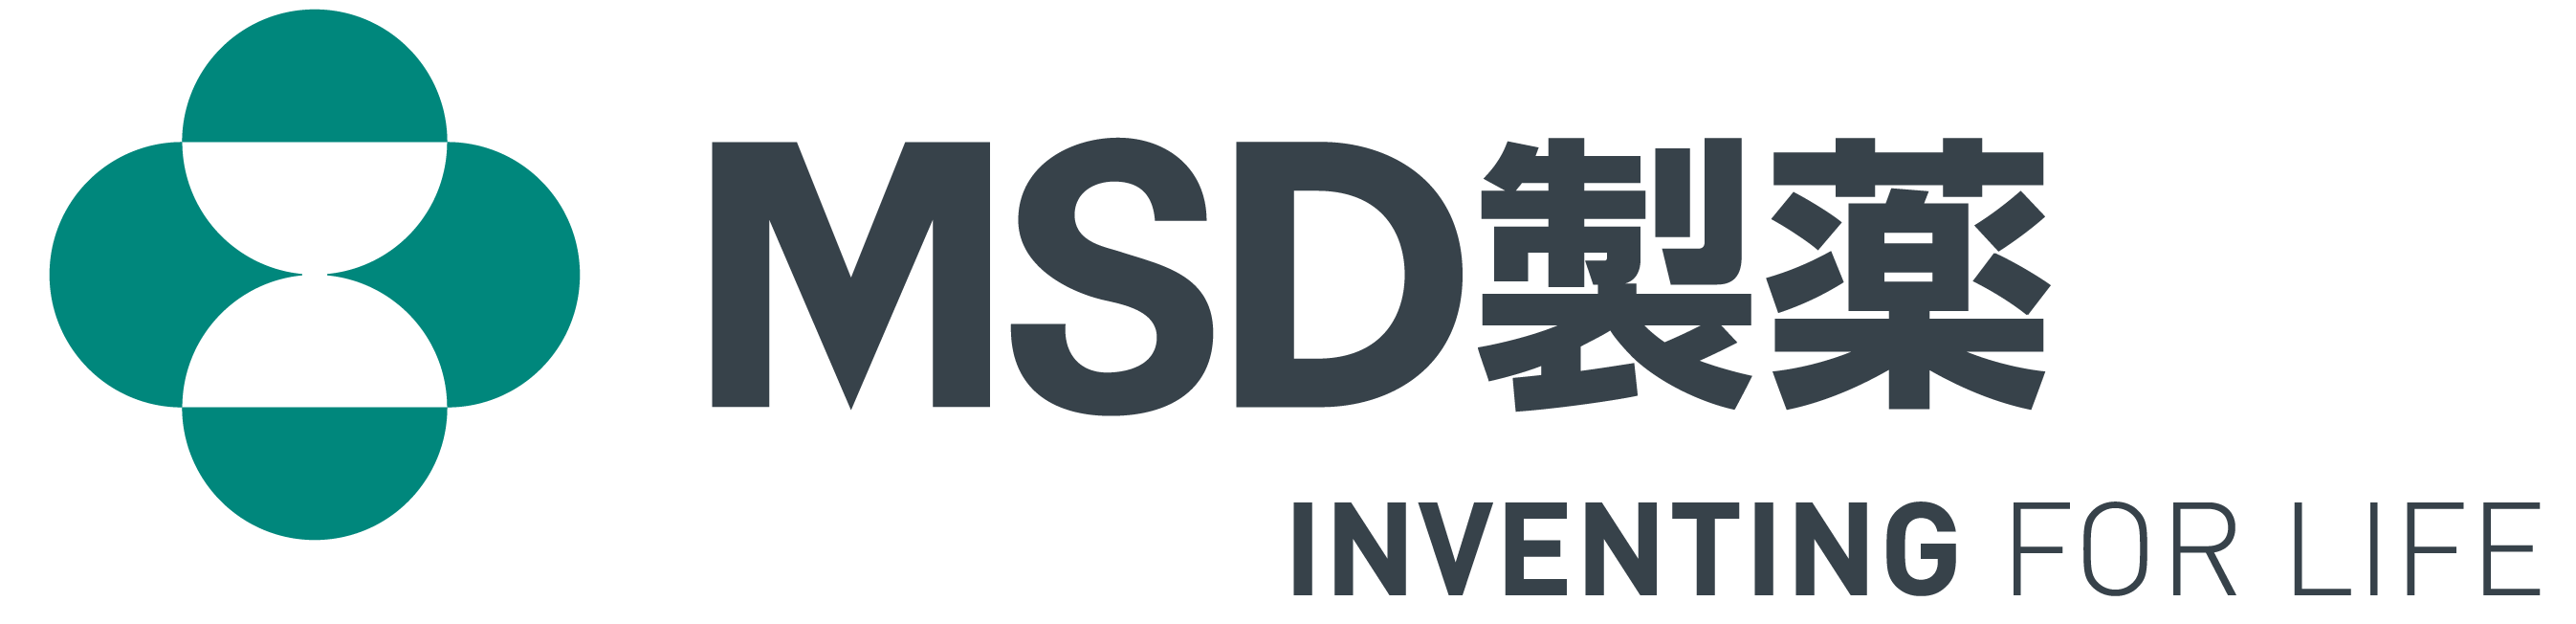 MSD製薬 INVENTING FOR LIFE